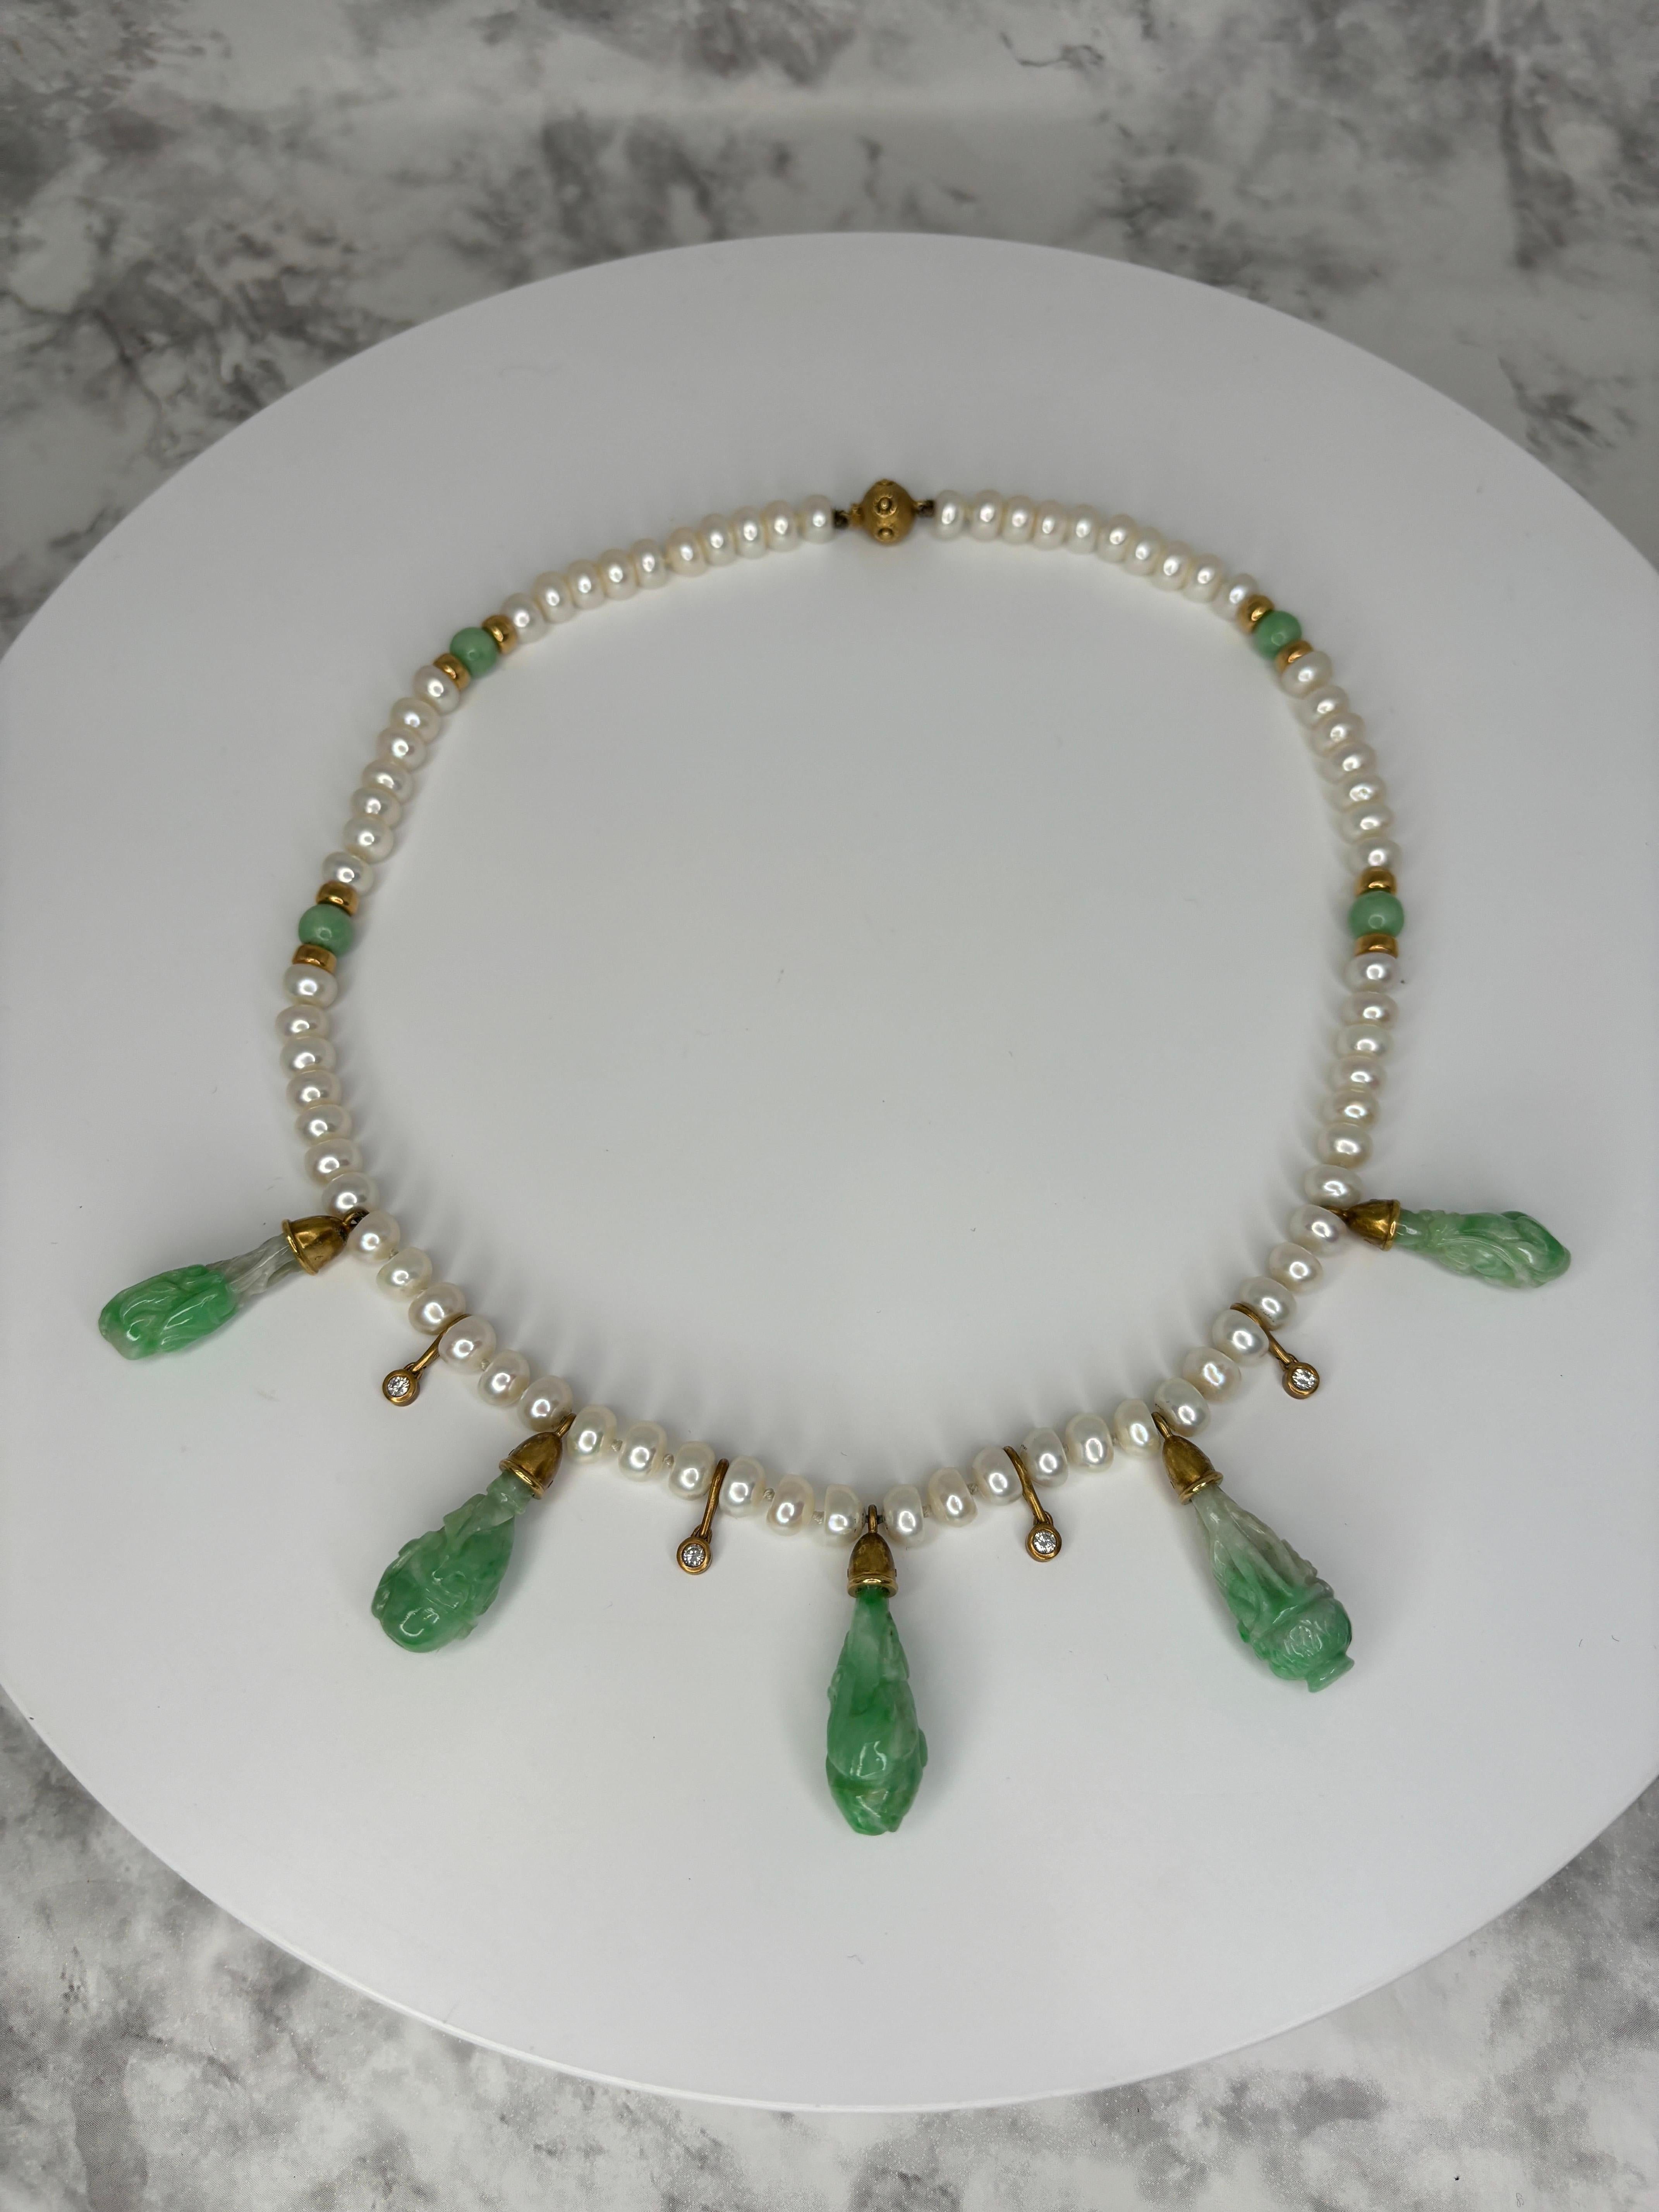 Brilliant Cut JKa Kohle & Co Yellow Gold Carved Natural Jadeite Diamond Pearl Drop Necklace For Sale